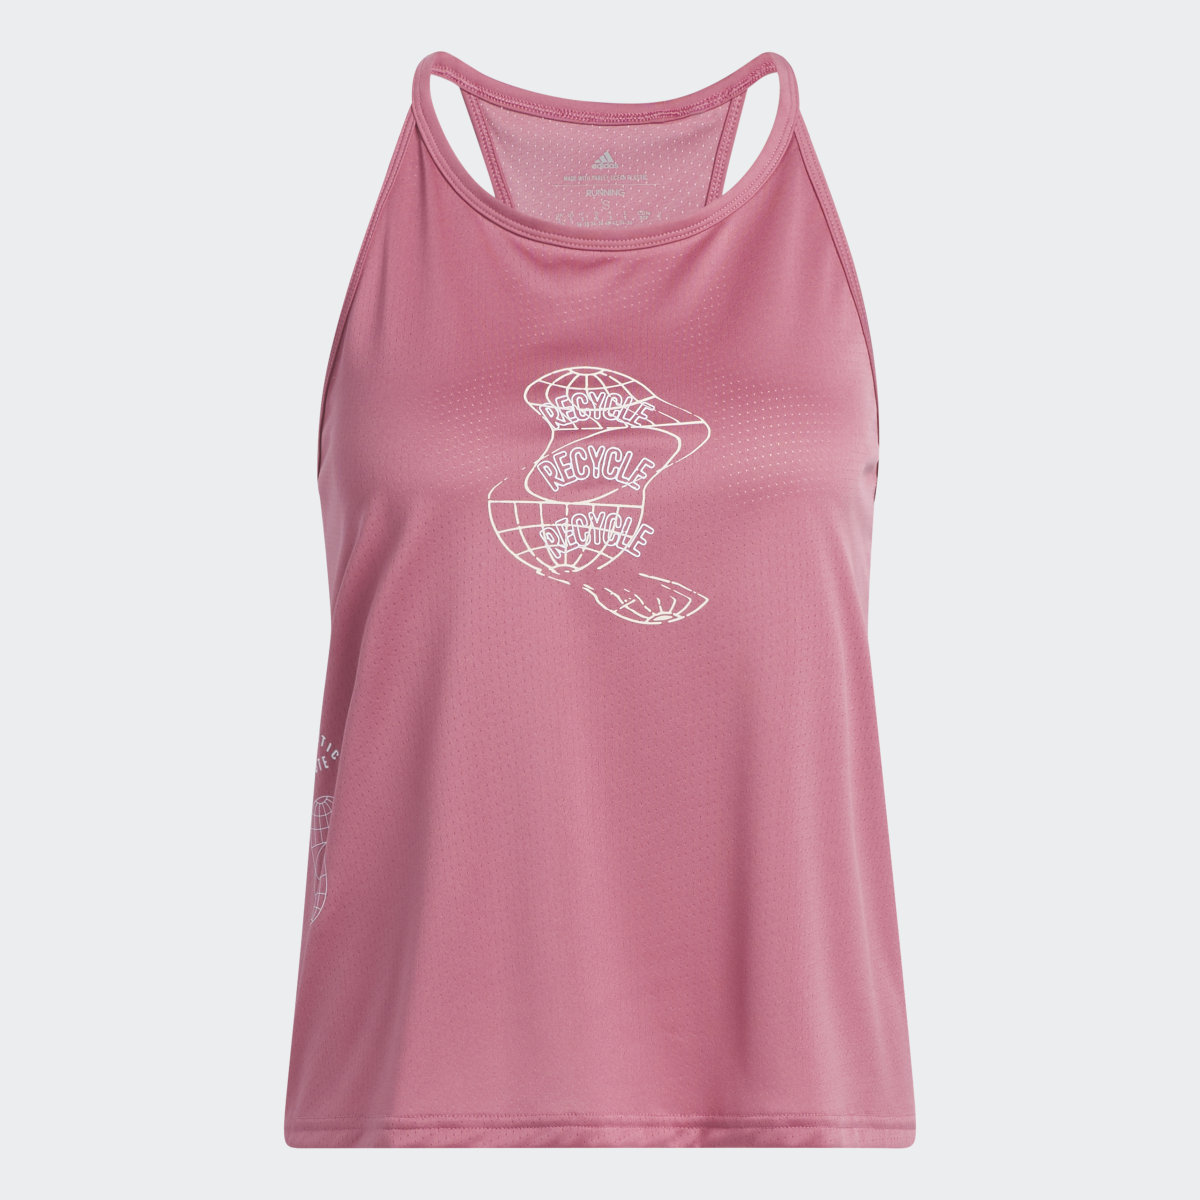 Adidas Run for the Oceans Tank Top. 5